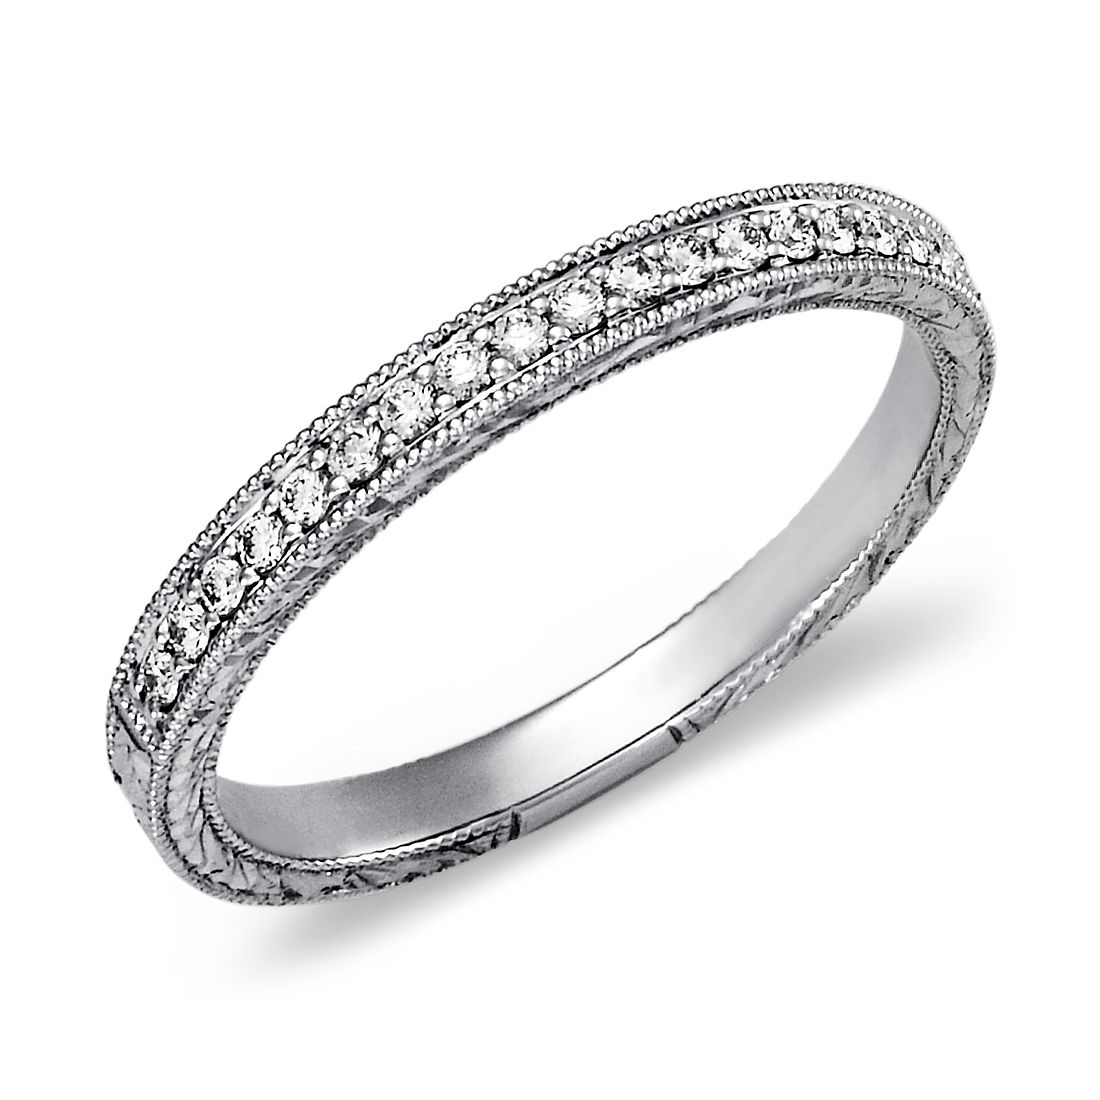 Hand-Engraved Micropavé Diamond Ring in Platinum (1/5 ct. tw.)